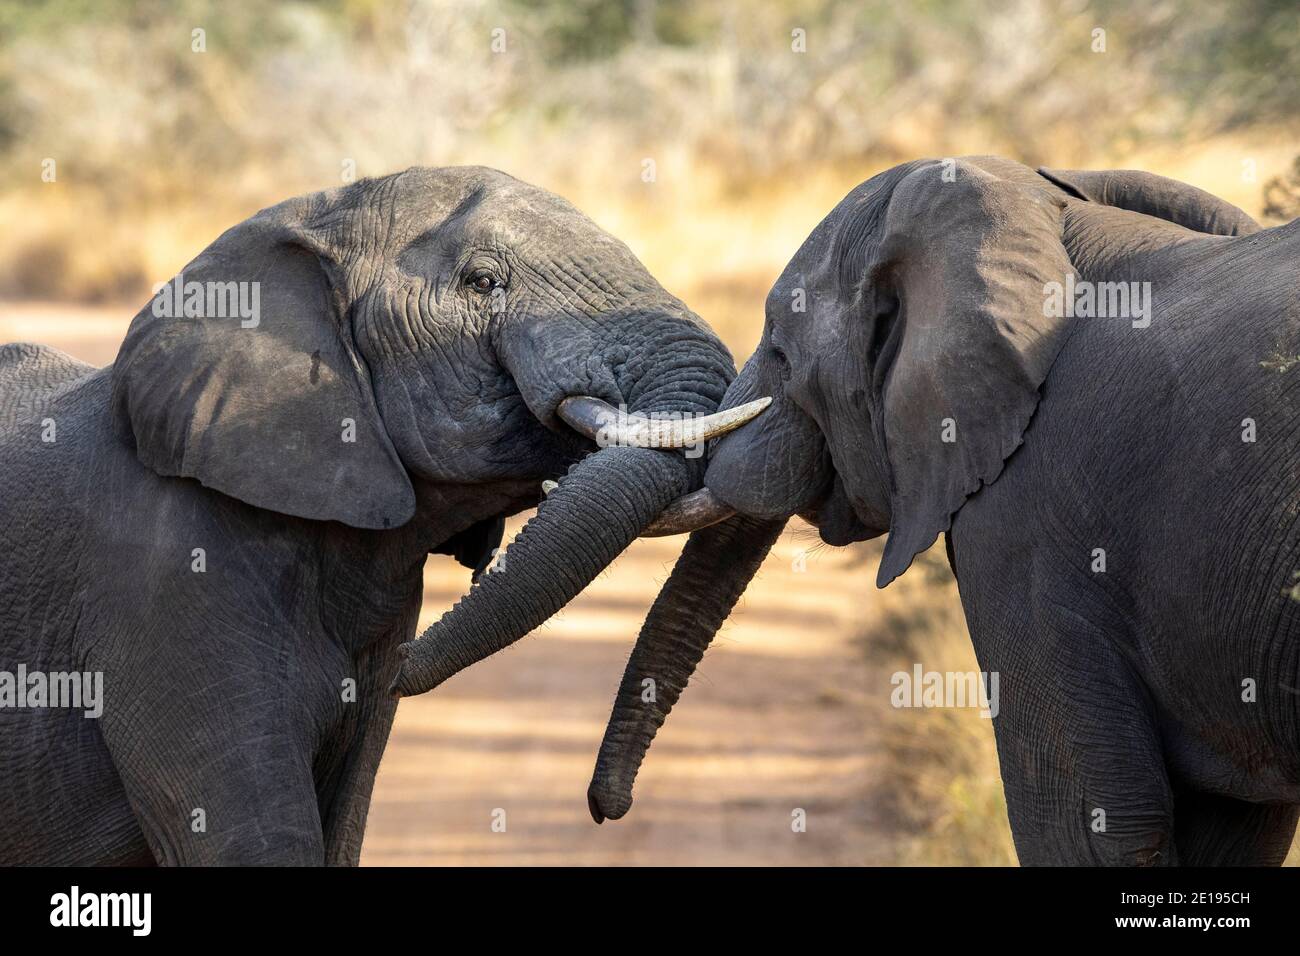 Two adult elephants play fighting in early morning sunlight in Kruger National Park in South Africa Stock Photo